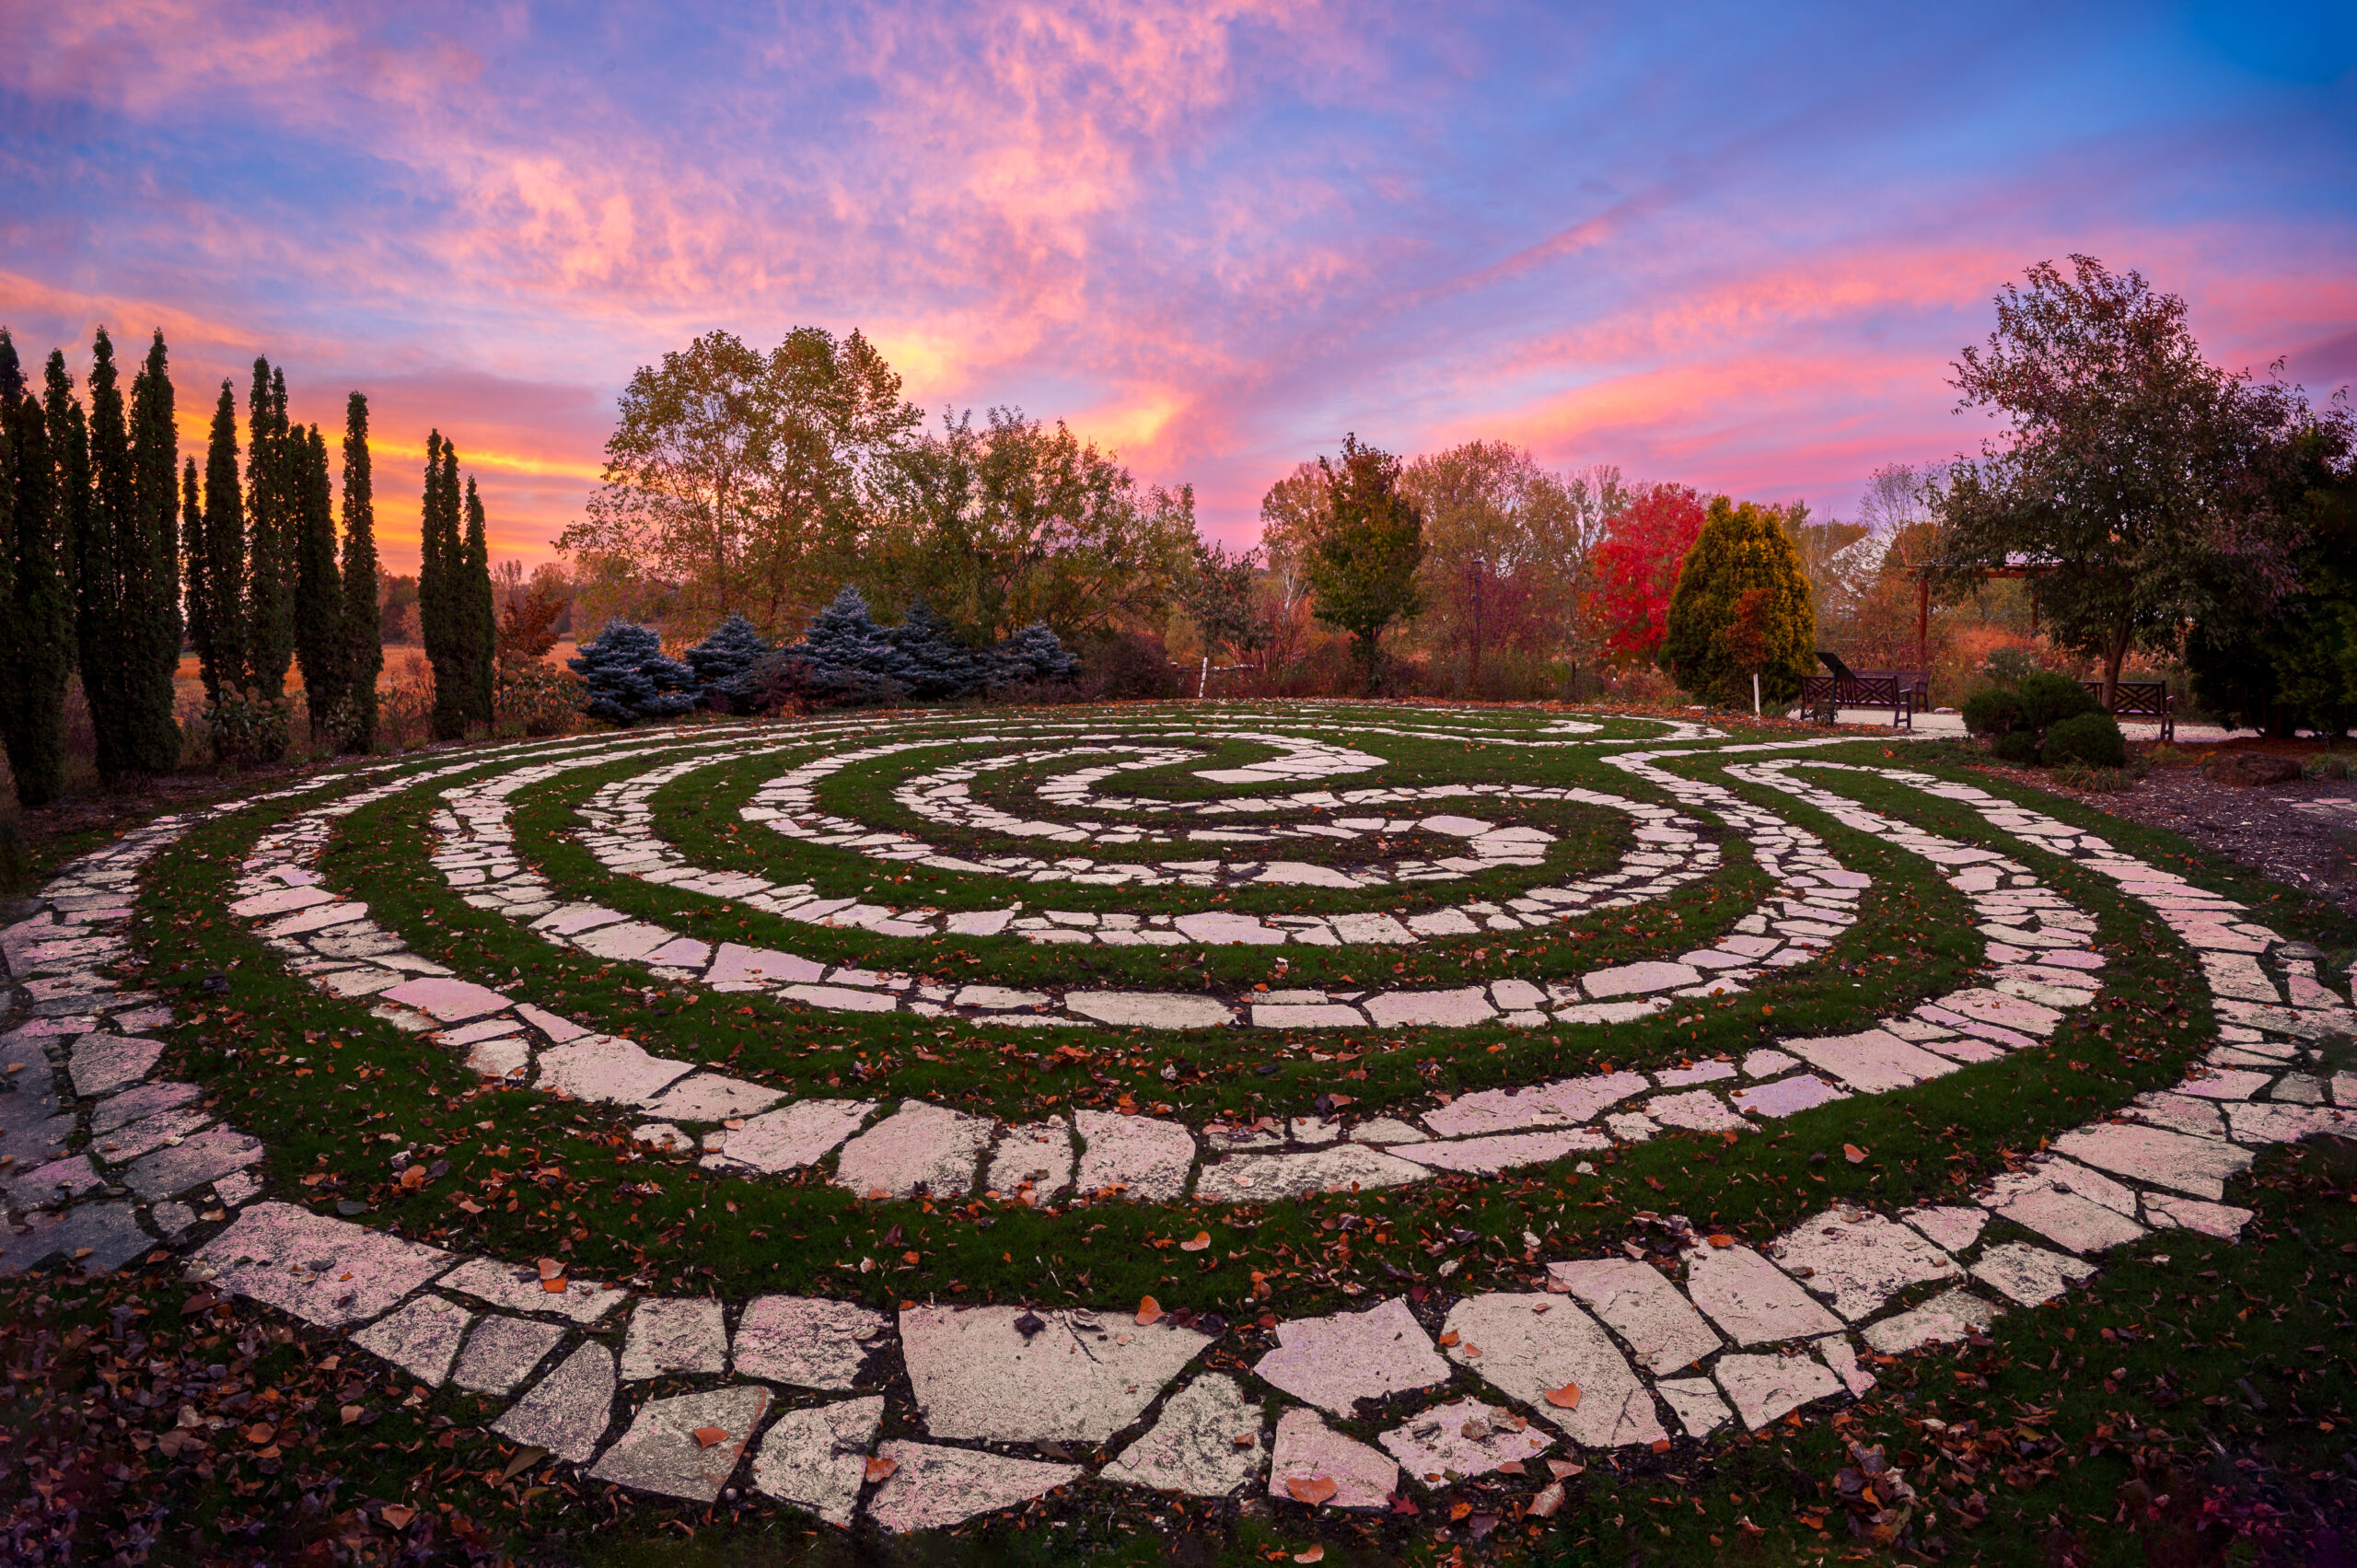 The Labyrinth in the Plymouth Millennium Garden by Larry Paulson